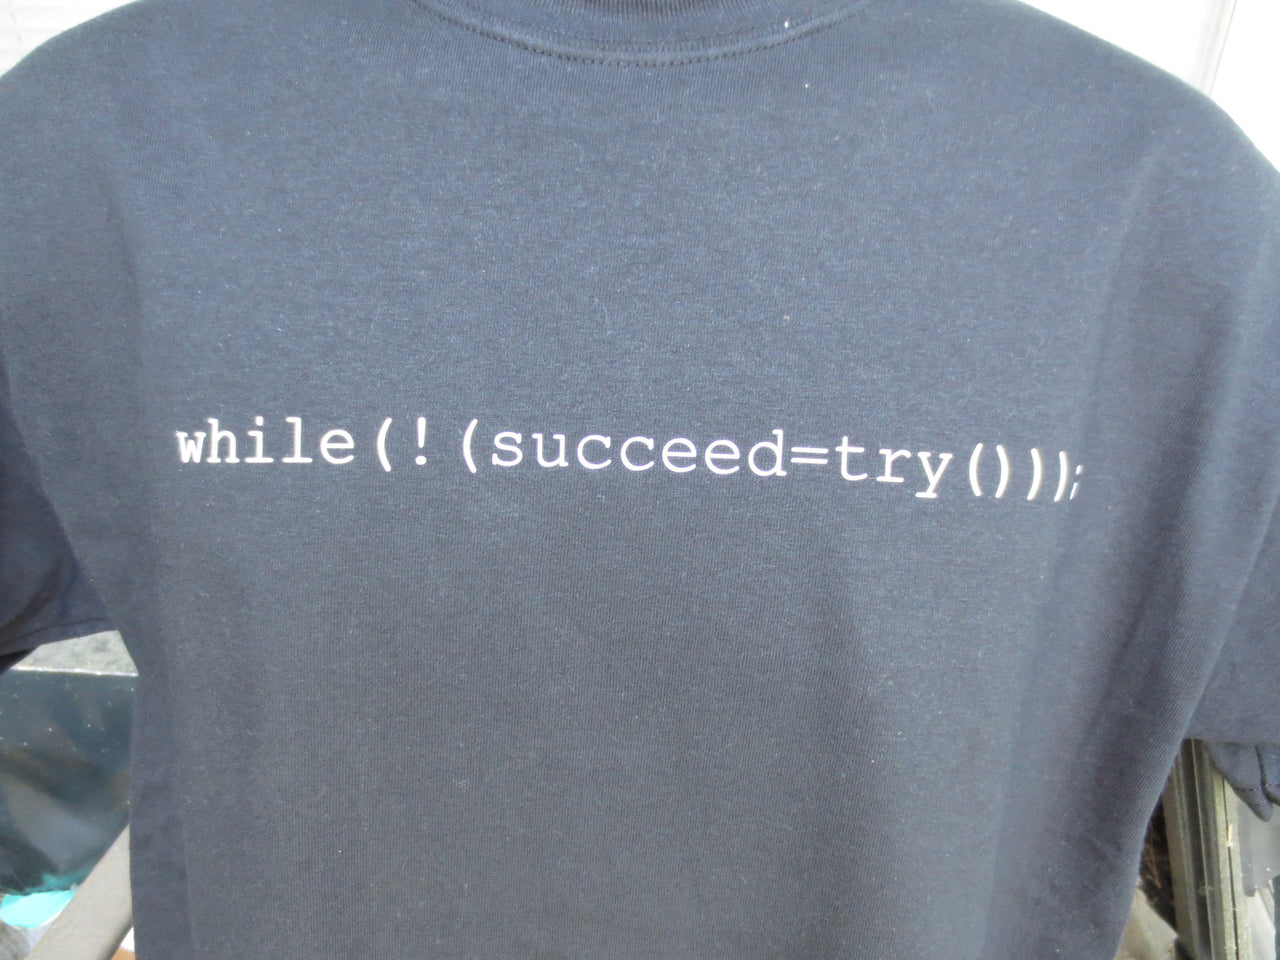 Try and Try Again (Computer Code) Black Tshirt With White Print - TshirtNow.net - 3